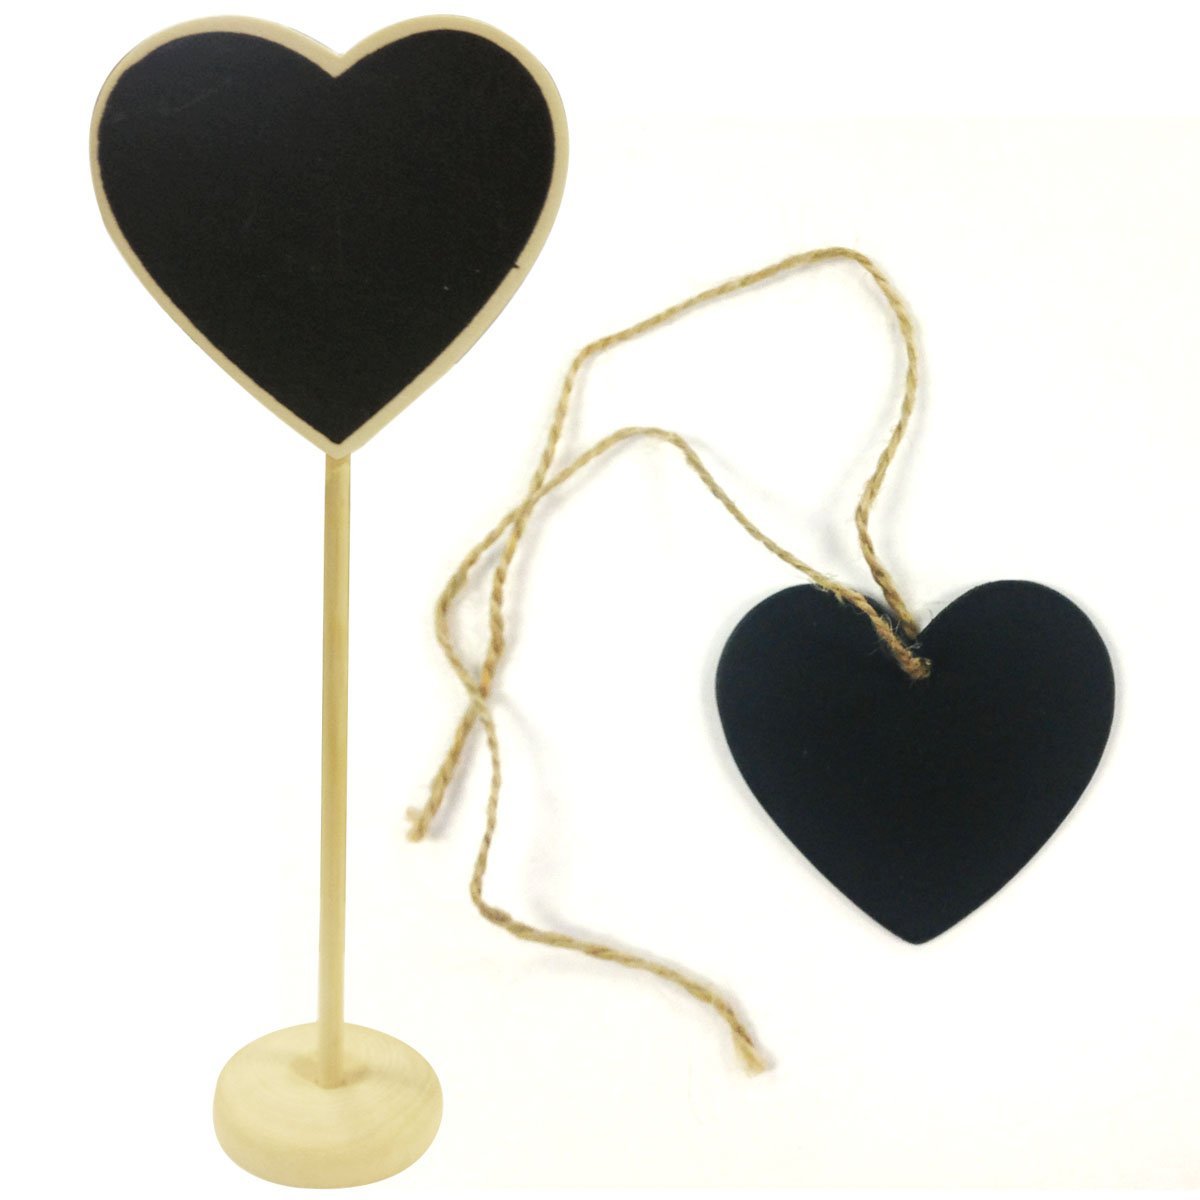 Wrapables Heart Mini Chalkboard Tag with Stand (Set of 6) + Rectangle Mini Chalkboard Tag (Set of 3)